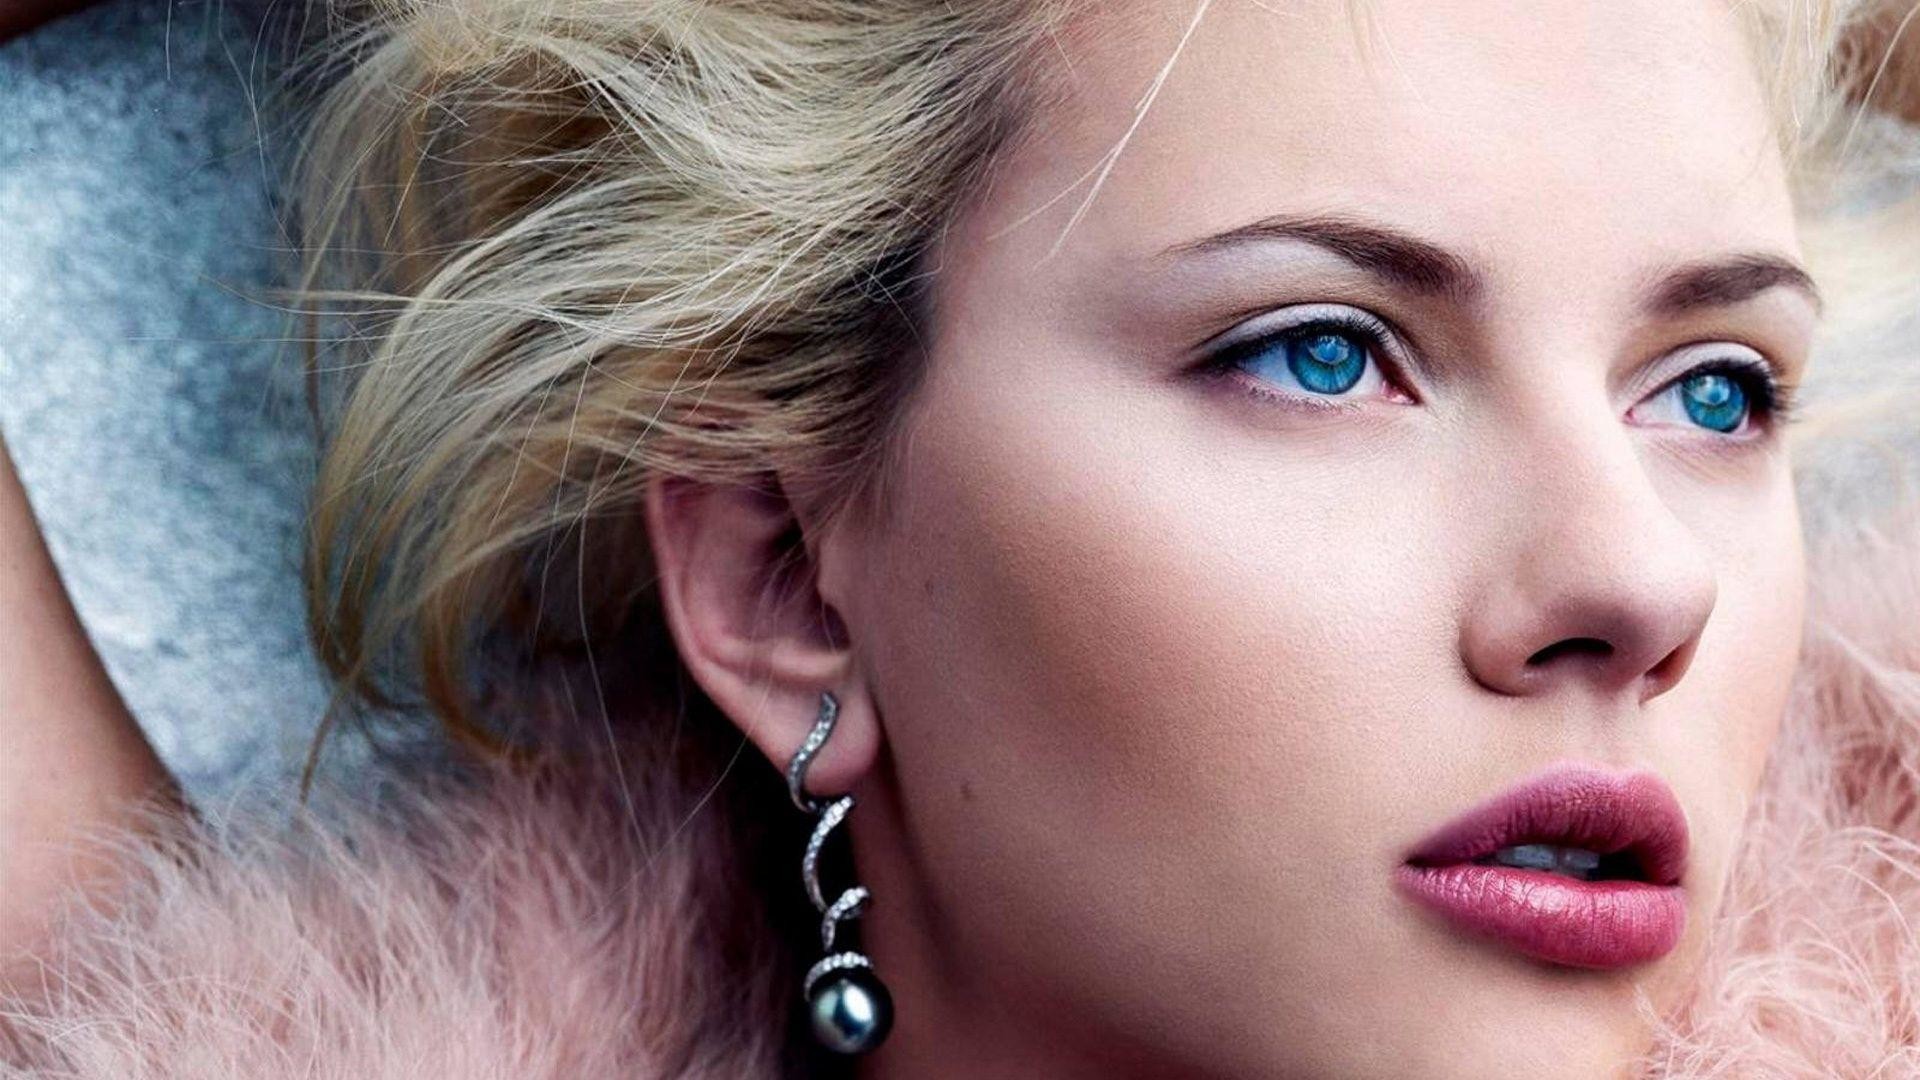 1920x1080 Widescreen Scarlett Johansson Sky Hd With 2017 Images For Iphone .